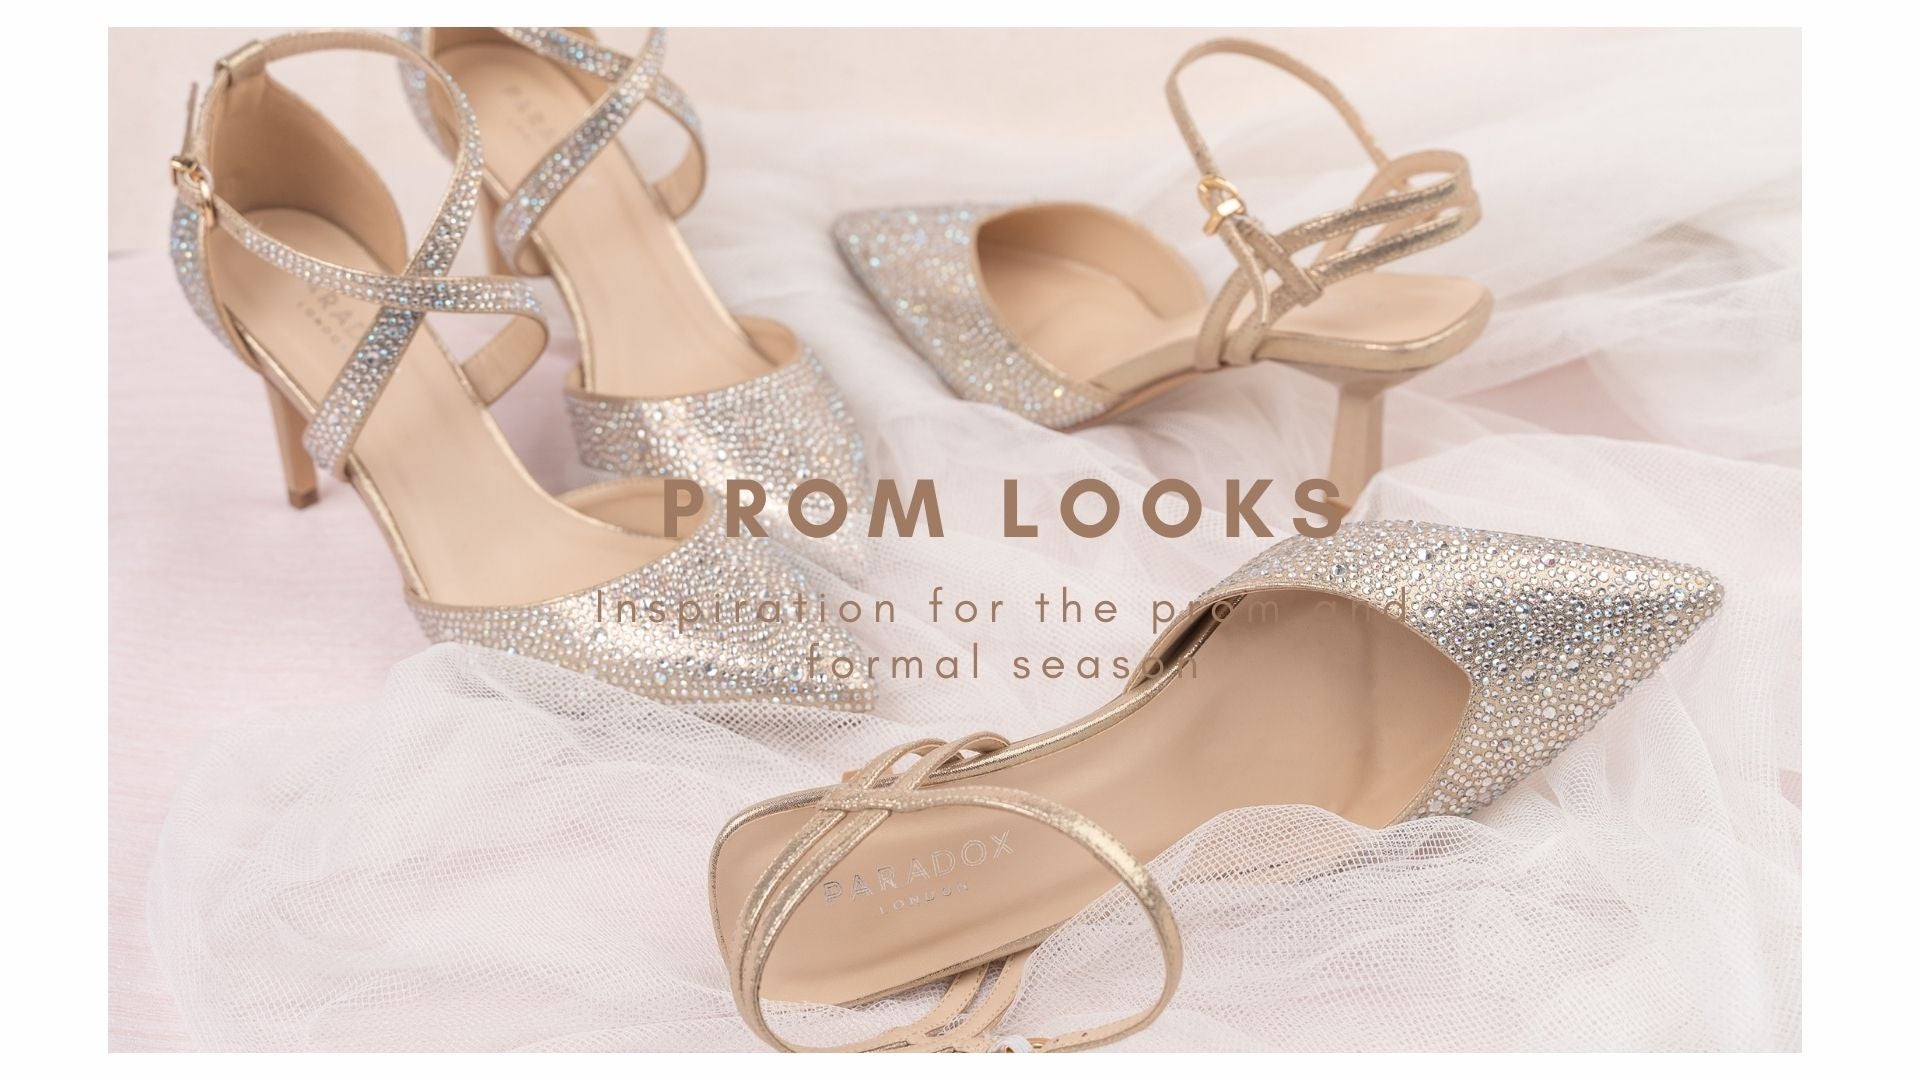 Prom Styling with Paradox London